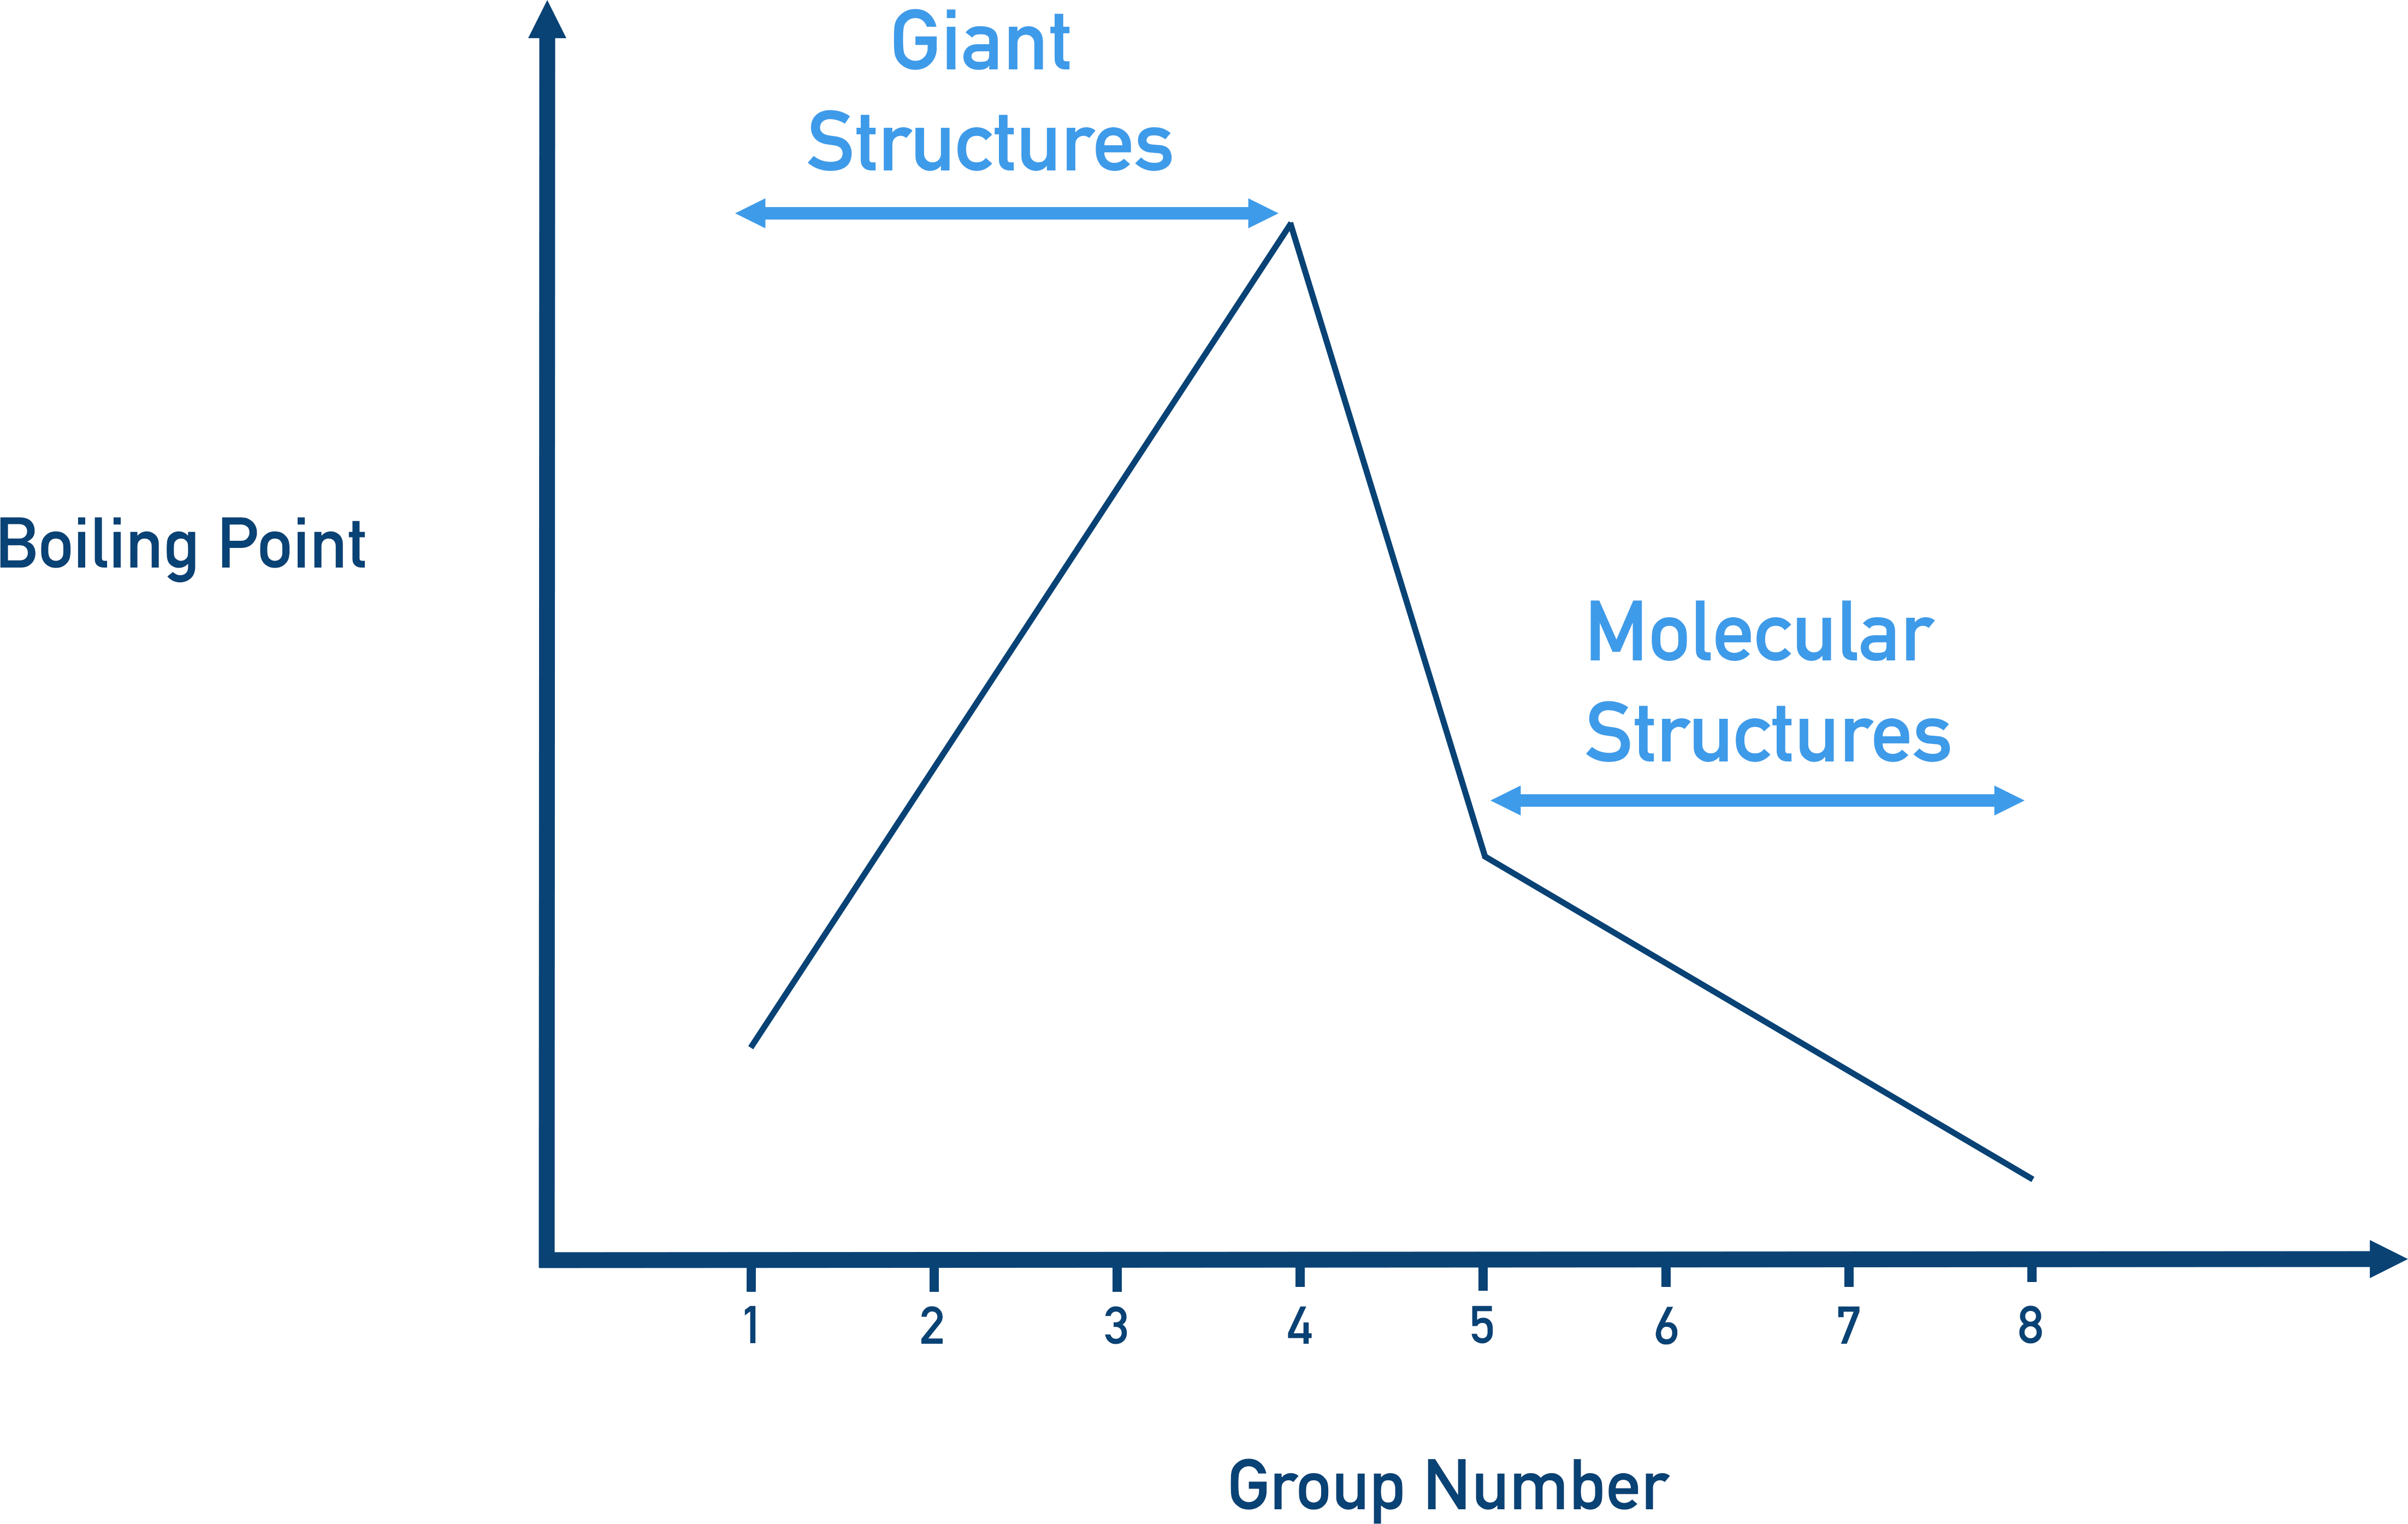 how boiling point changes across a period giant structures molecular structures